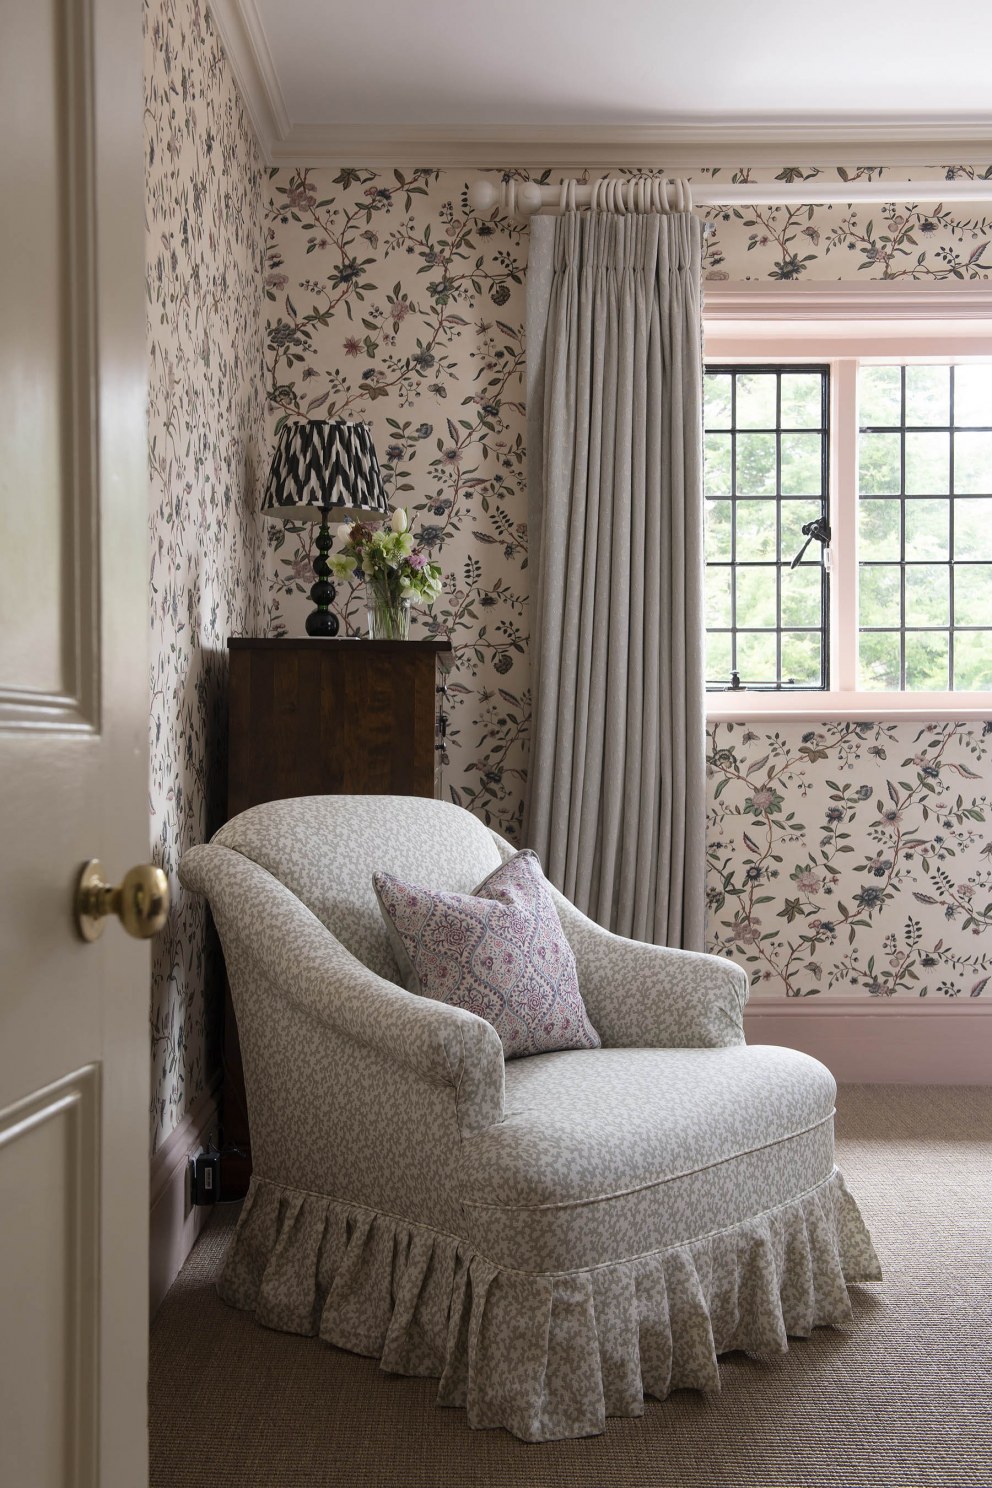 Haslemere House | Floral Room | Interior Designers